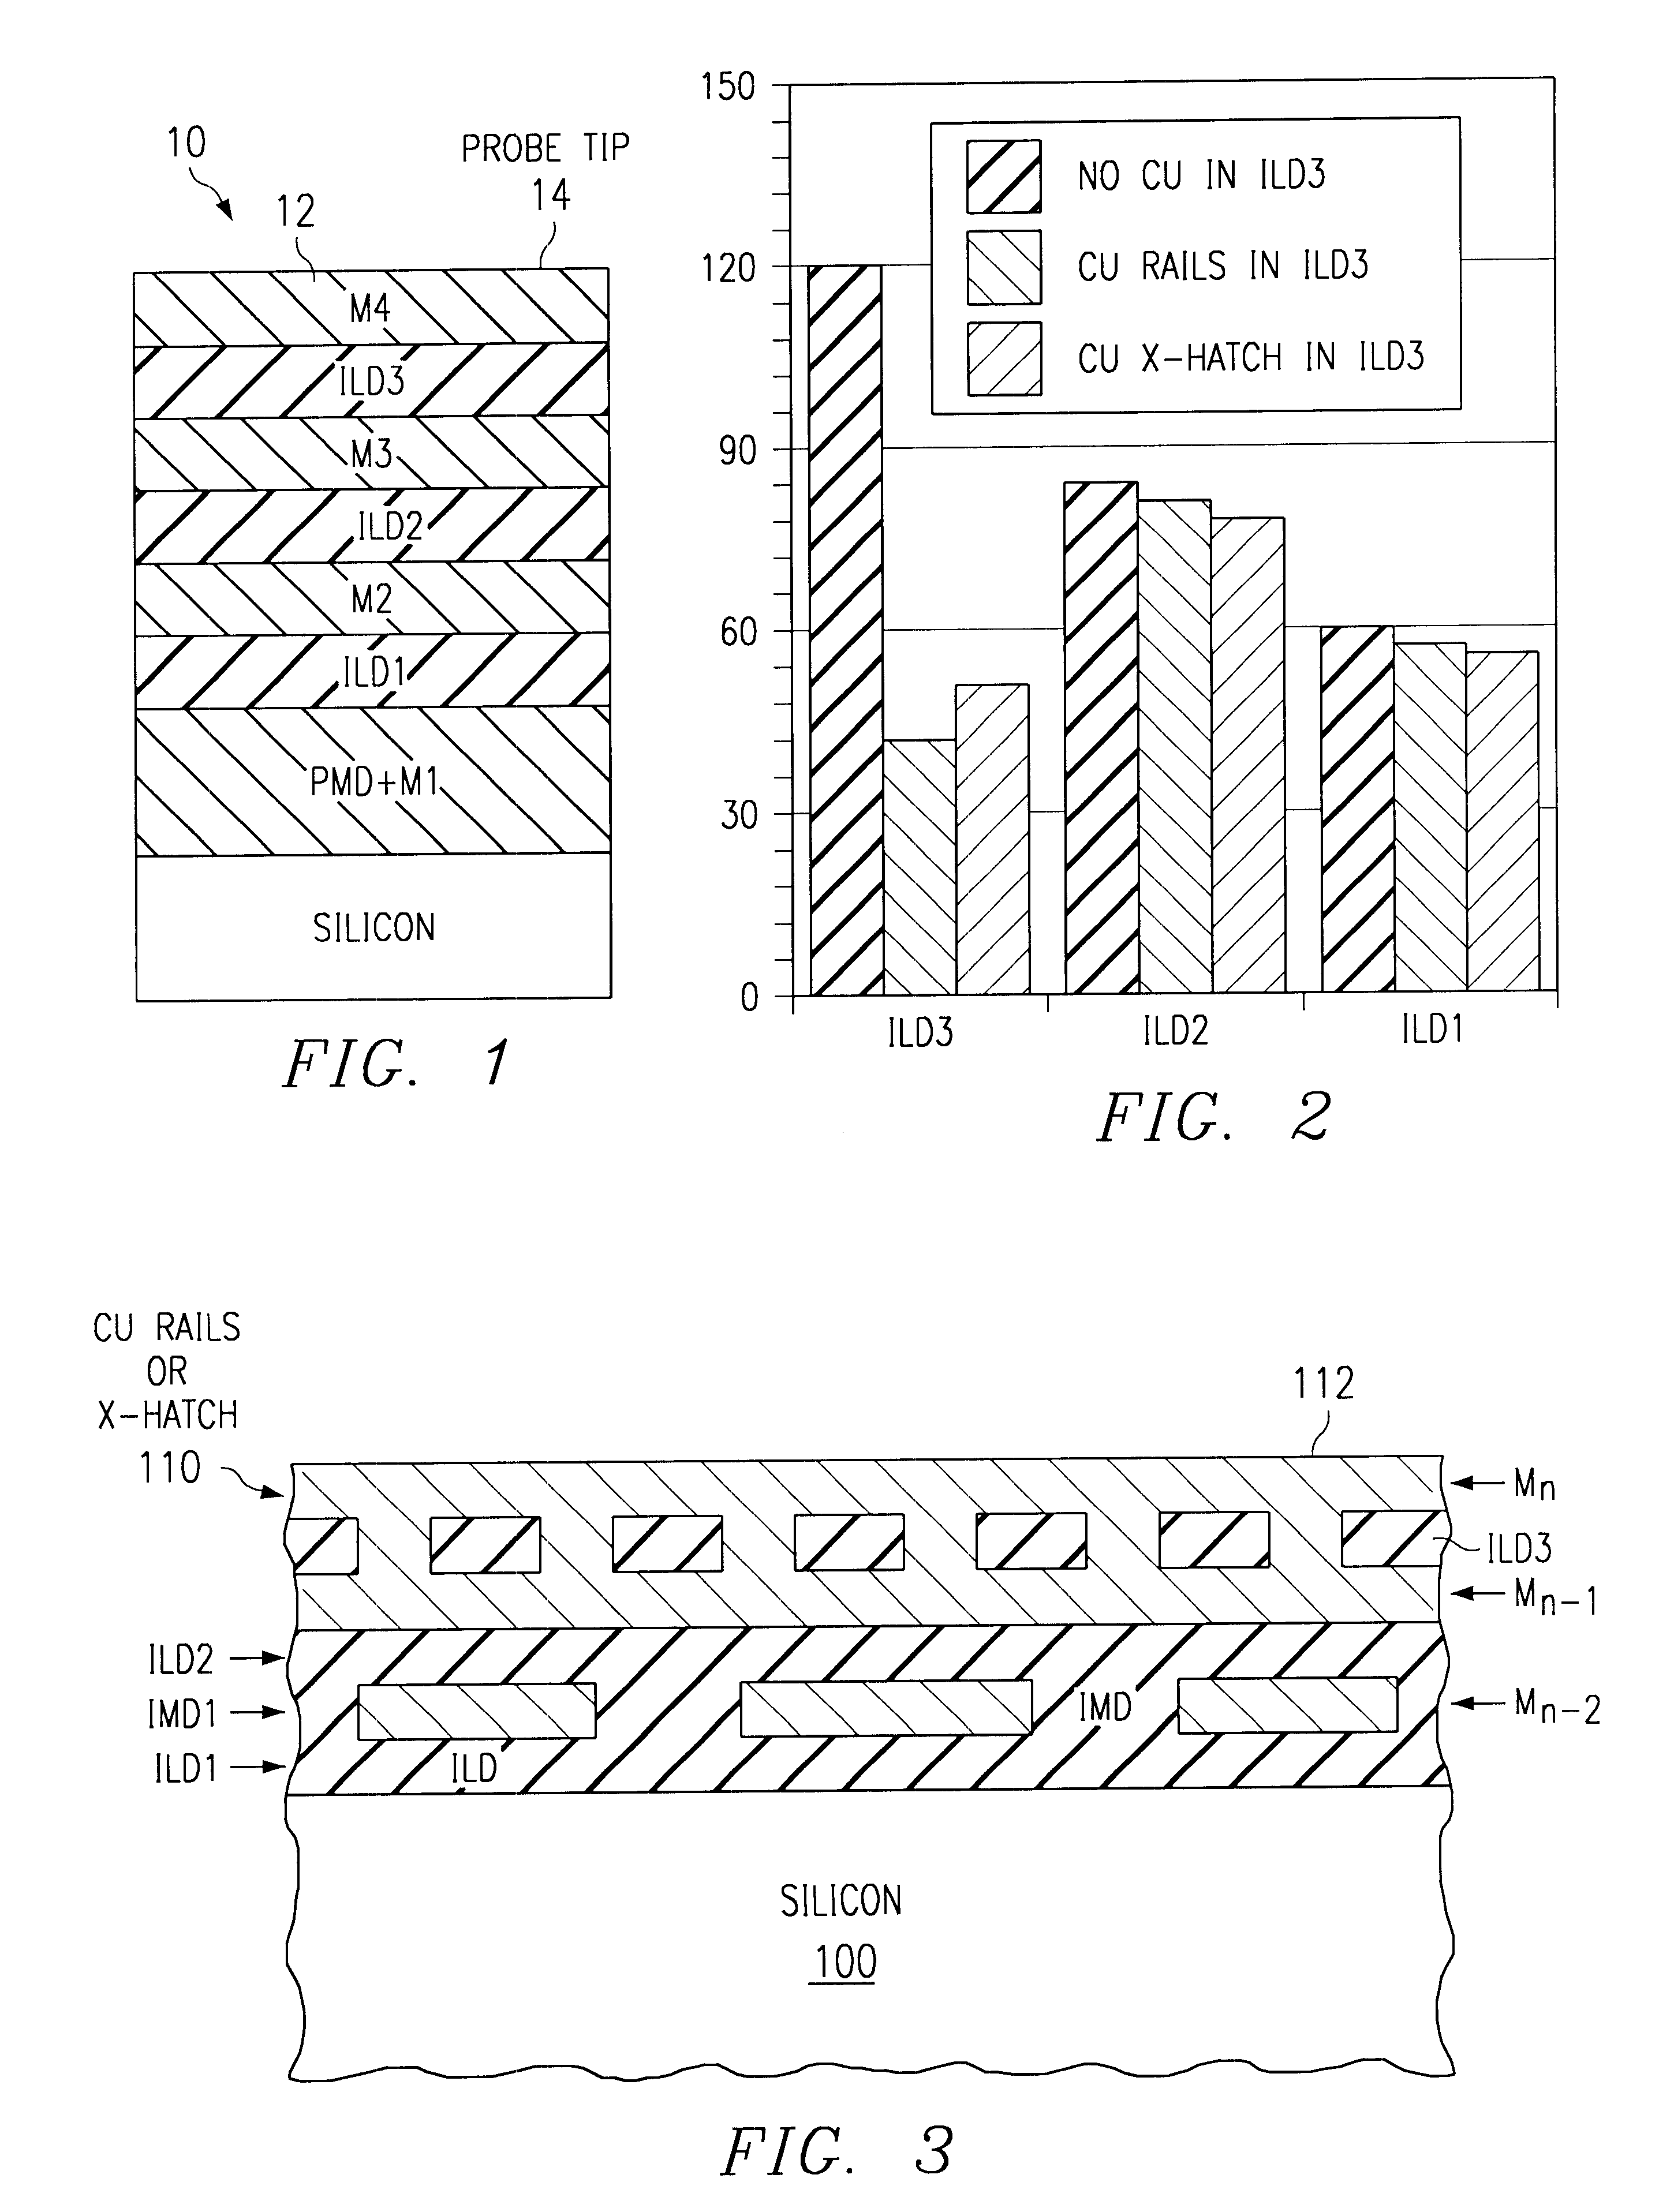 Approach to structurally reinforcing the mechanical performance of silicon level interconnect layers